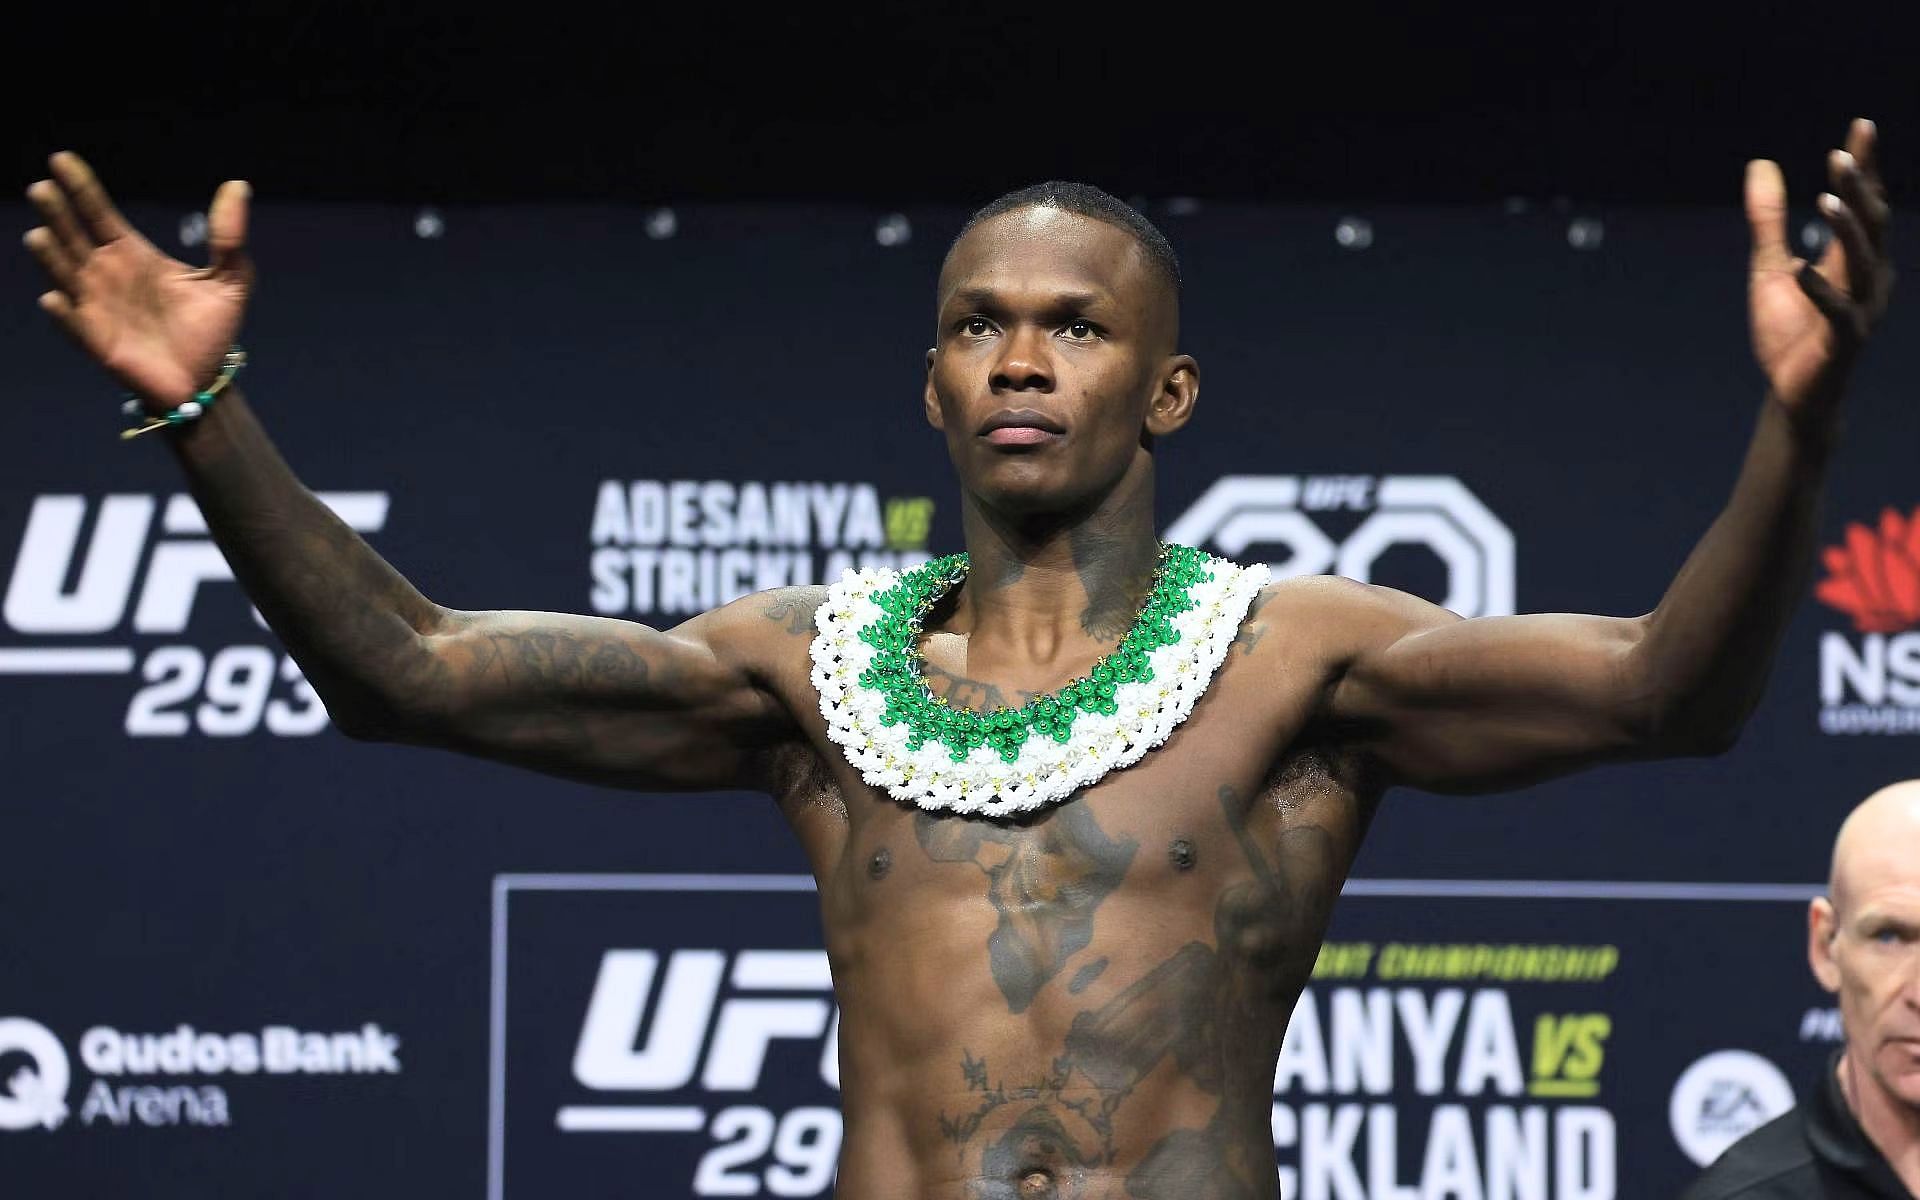 Israel Adesanya (pictured) names three opponents he would like to fight when he returns from hiatus [Image Courtesy: @GettyImages]